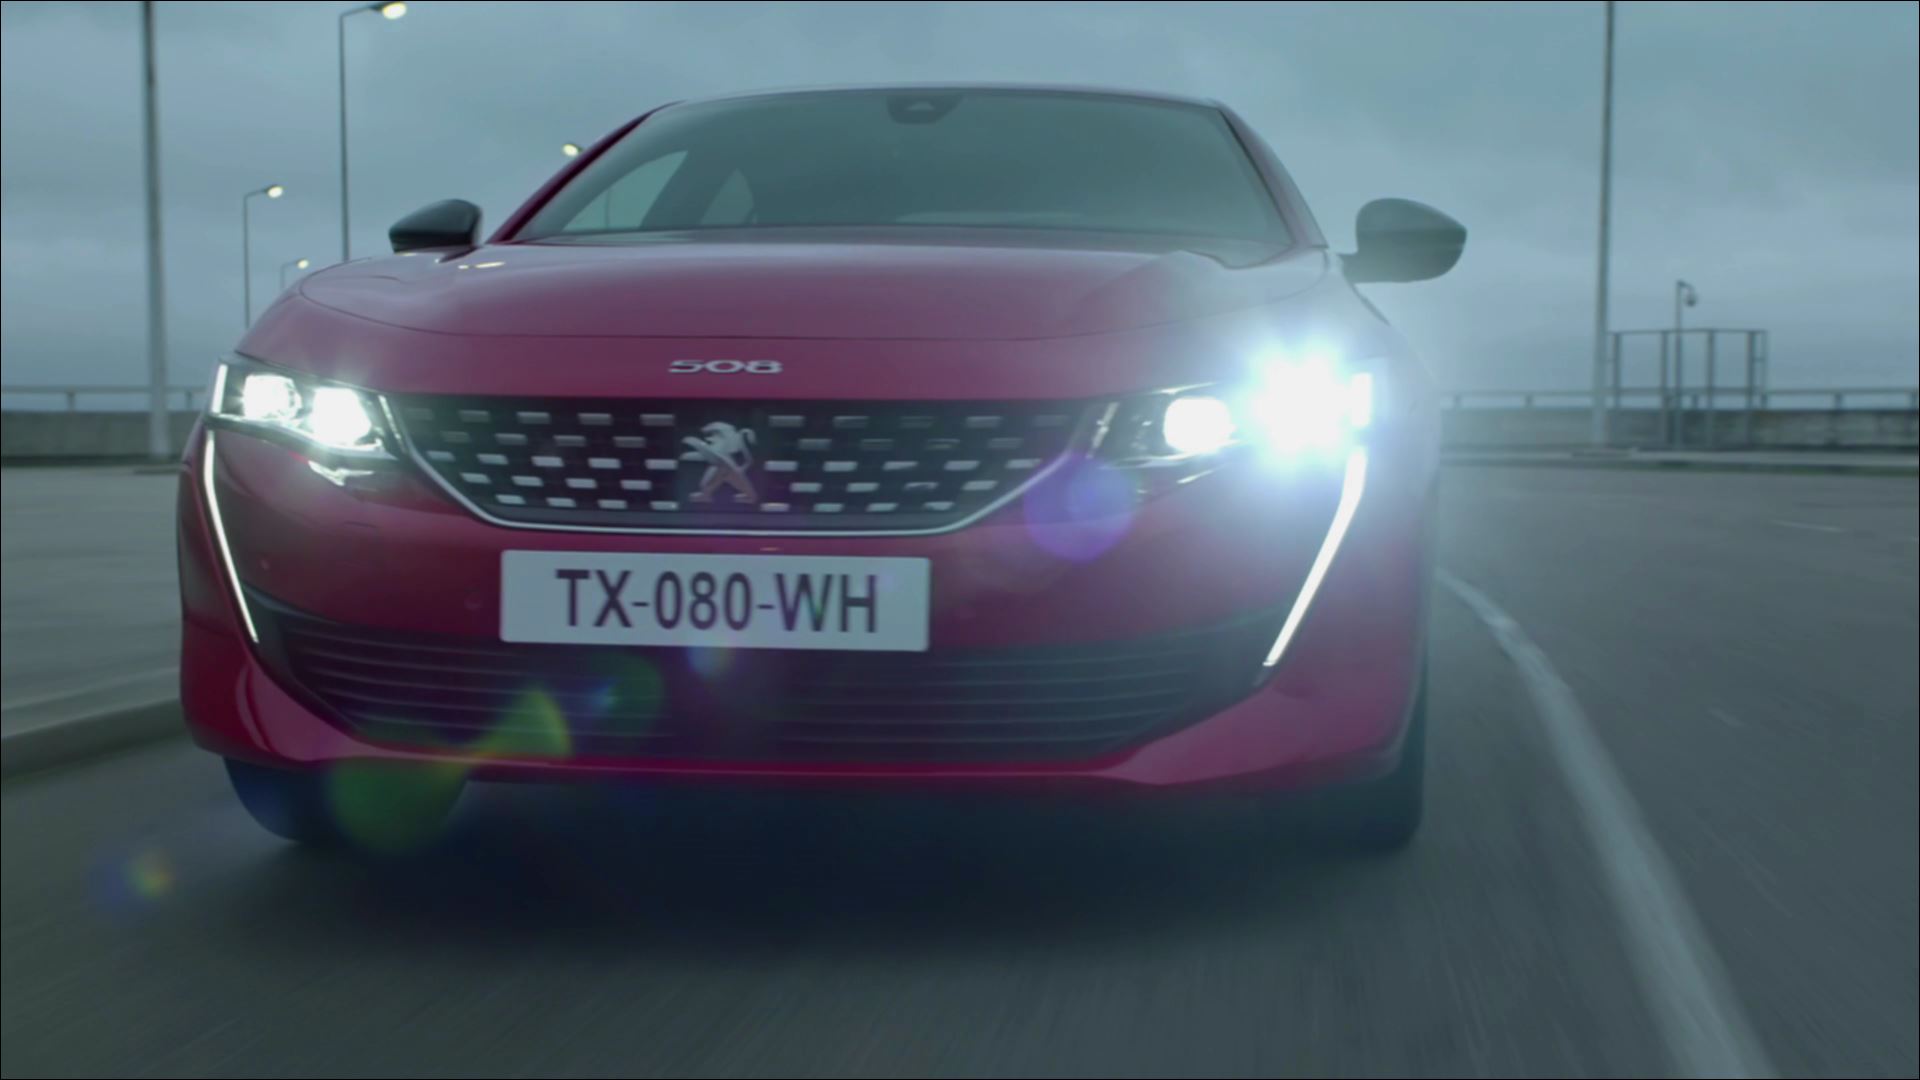 NEW PEUGEOT 508 - What Drives You?